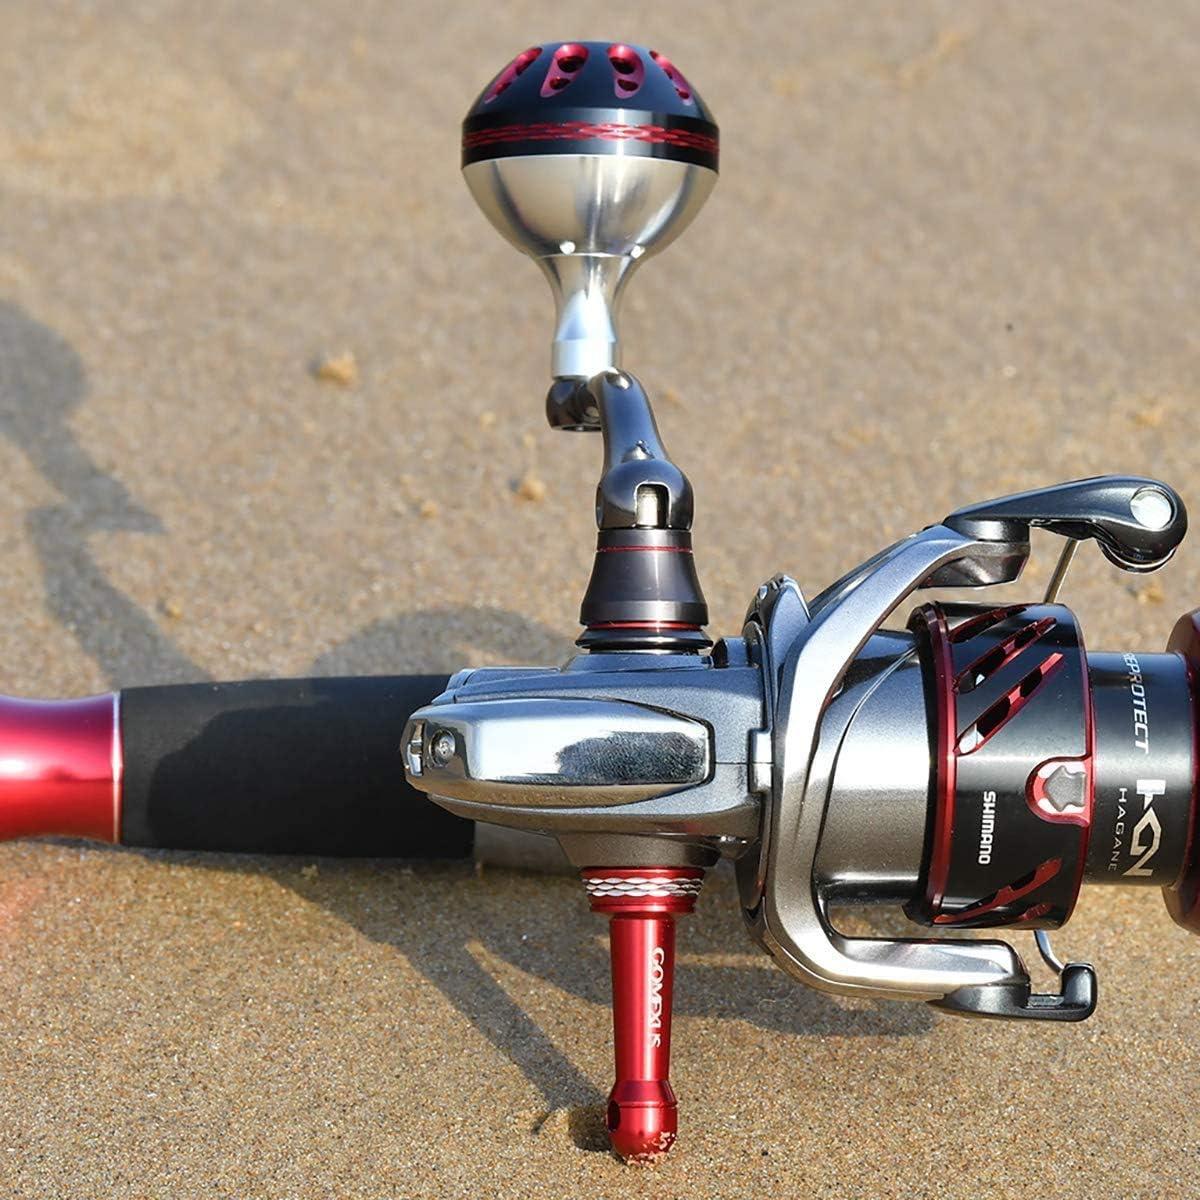 GOMEXUS Reel Stand Protect Reel from Rock Compatiable for Shimano Stradic  Stella Vanford Daiwa Certate Exist Red for Vanford/Stradic CI 4 42mm-basic